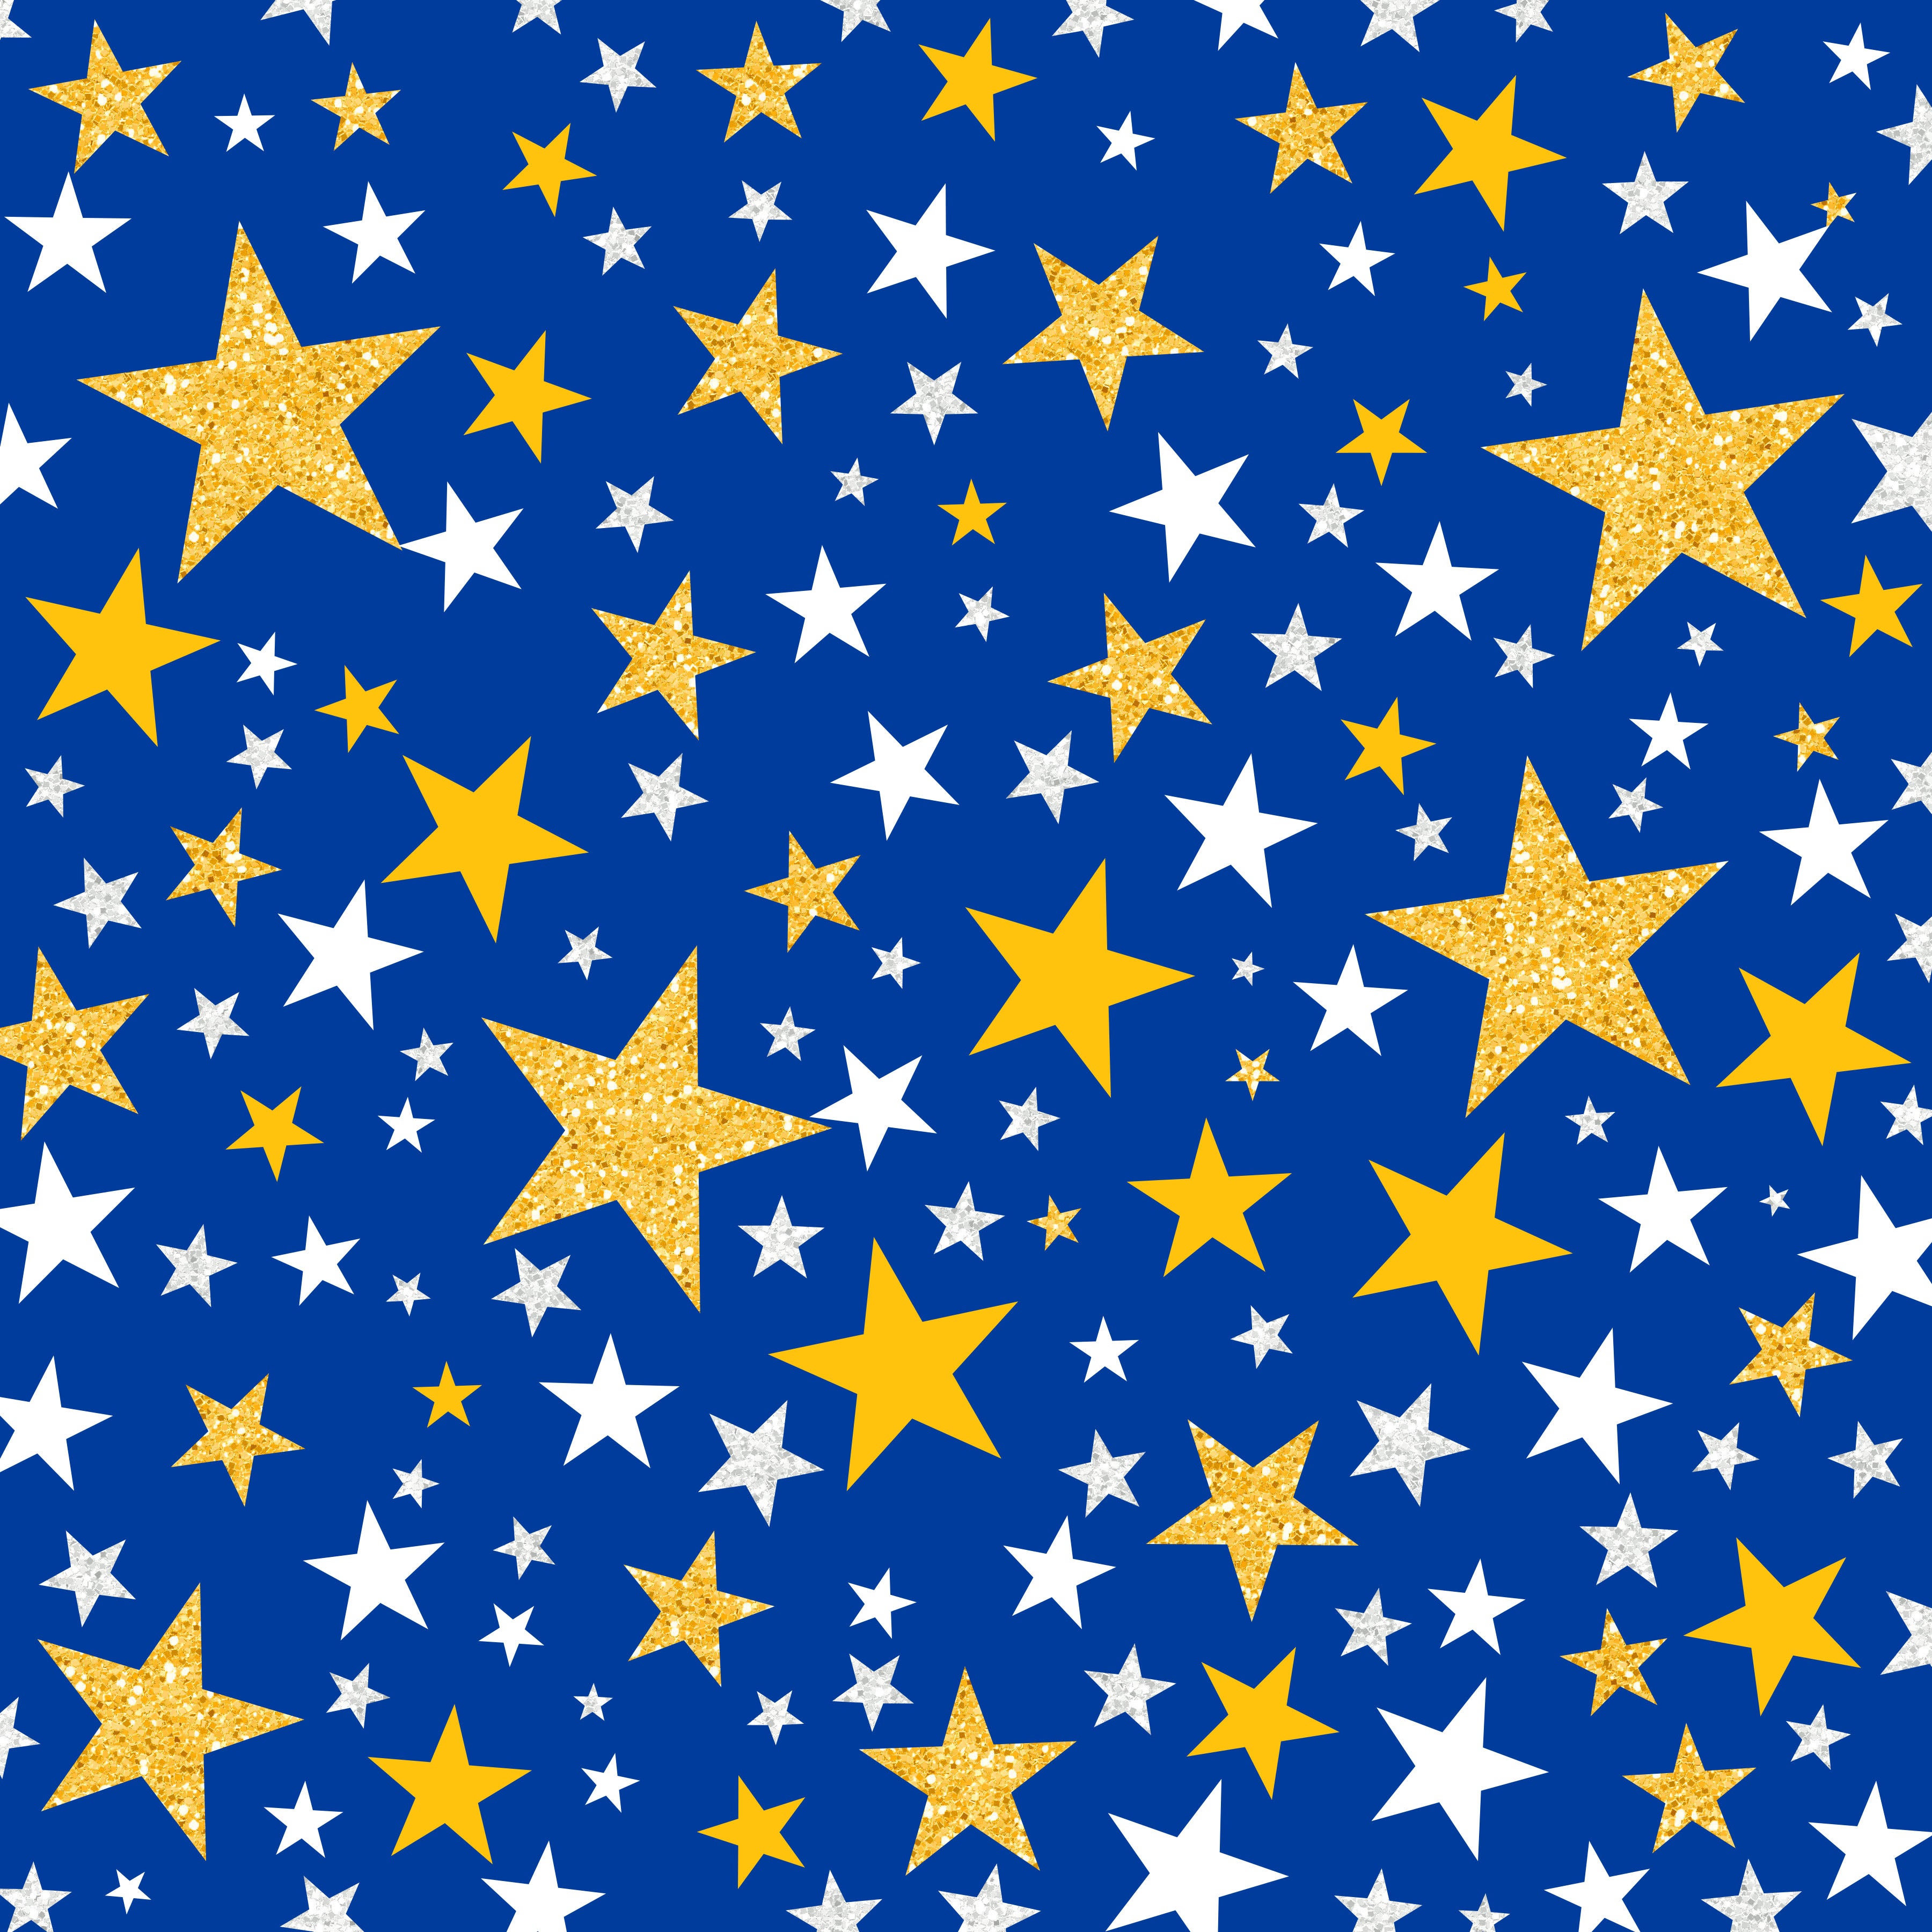 Blue and Yellow Stars Patterned Vinyl 12" x 12" - The Vinyl Haus